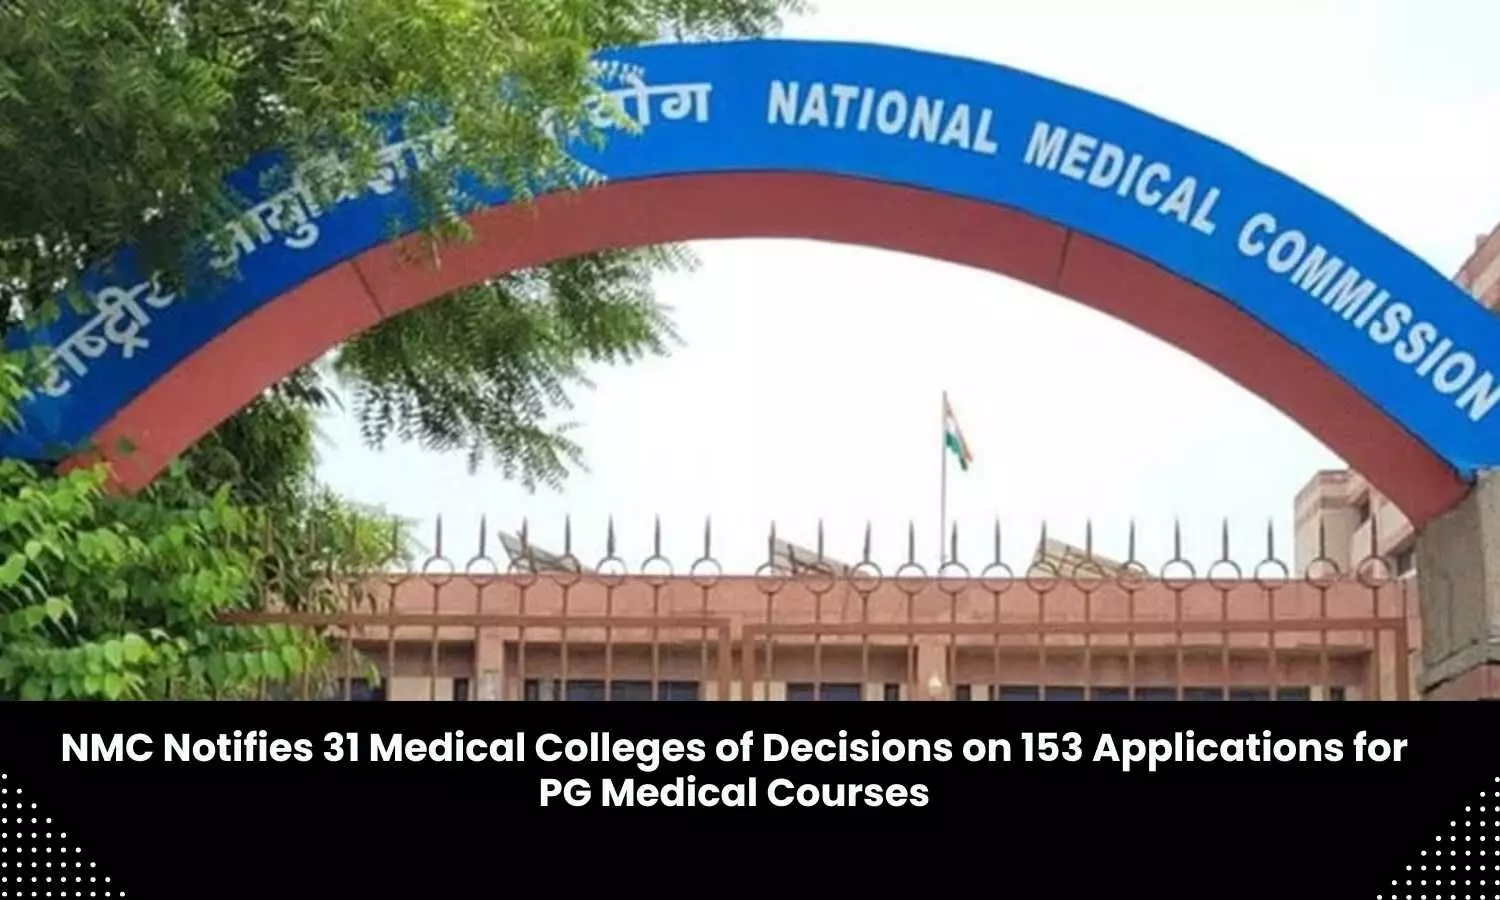 NMC gives final decision on 153 applications by 31 medical institutes to start new PG medical courses, increase PG medical seats